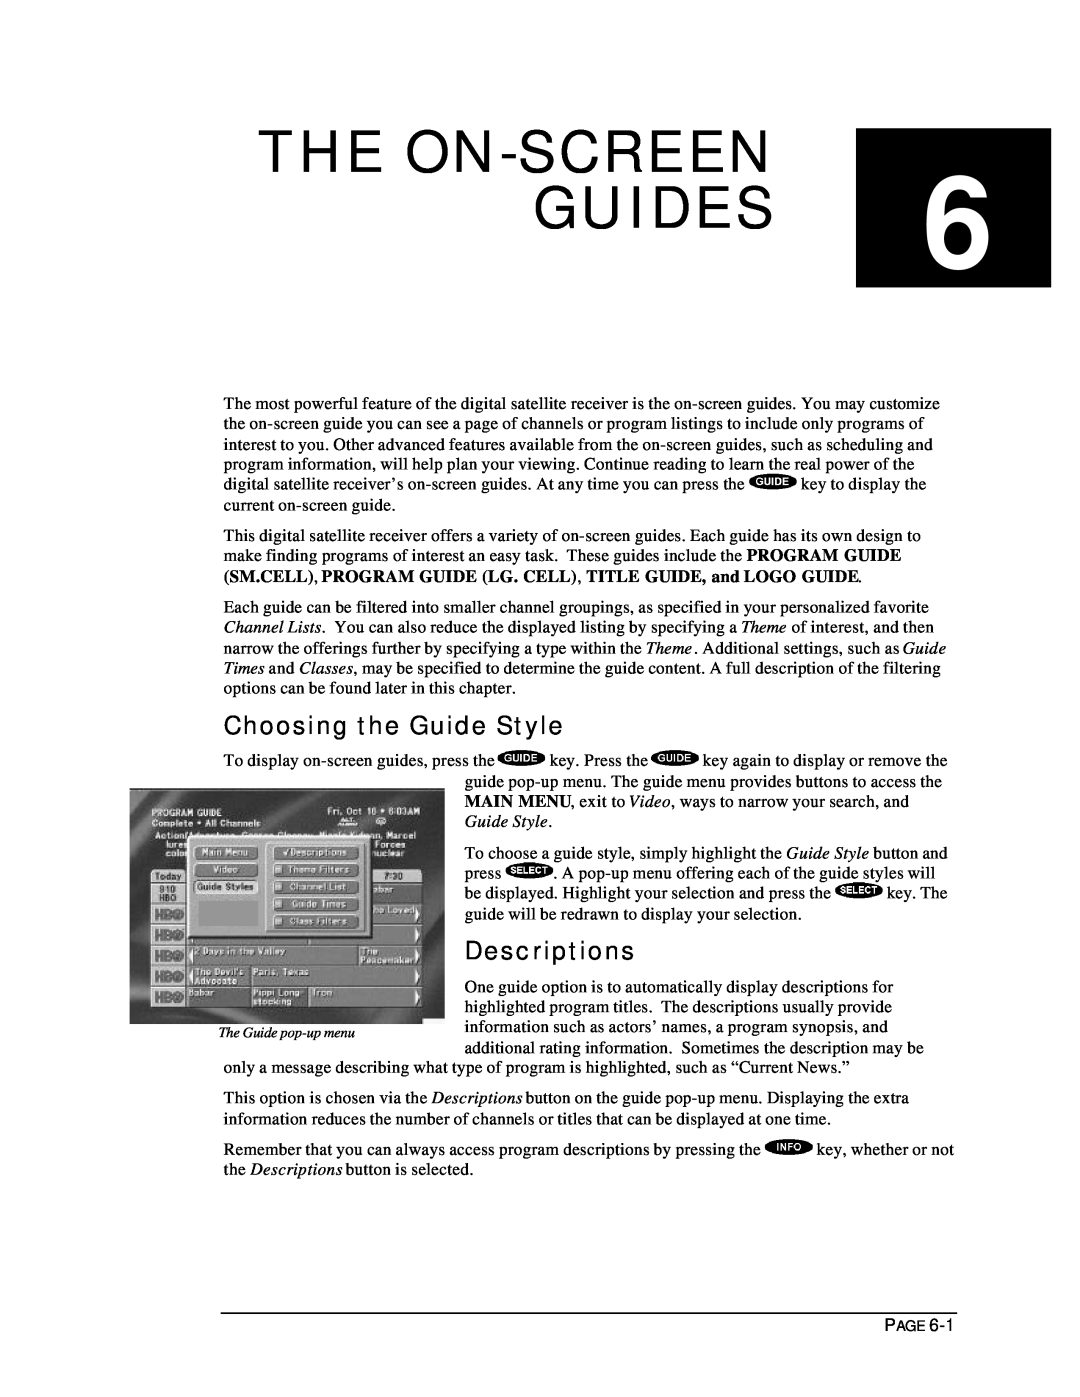 DirecTV HIRD-D11, HIRD-D01 owner manual The On-Screenguides, Choosing the Guide Style, Descriptions 